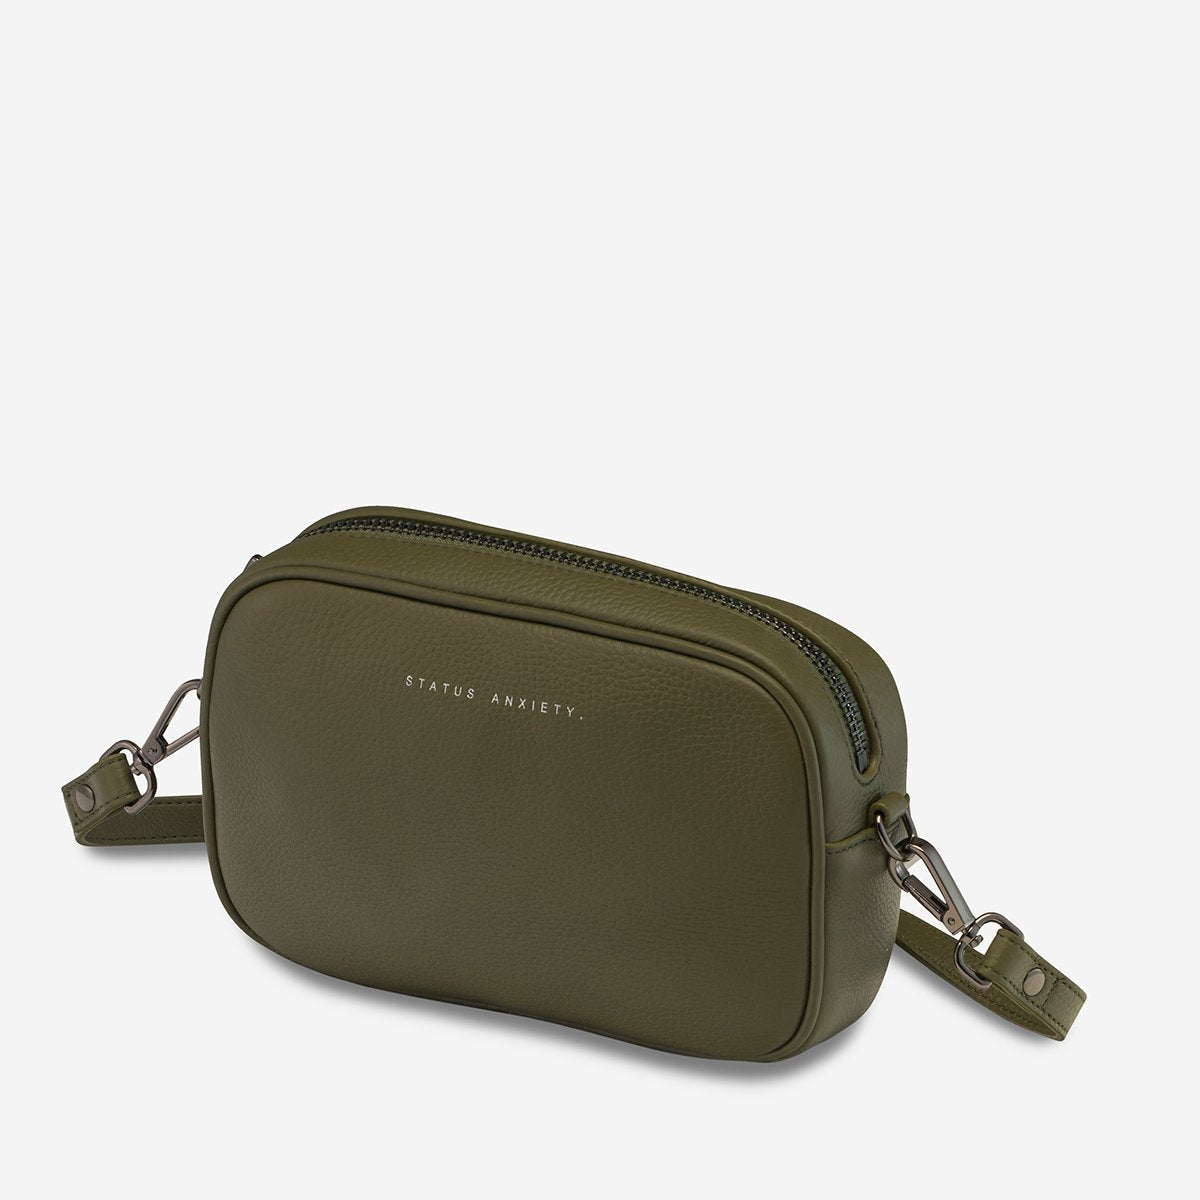 Status Anxiety Plunder Bag in Khaki Top Angle